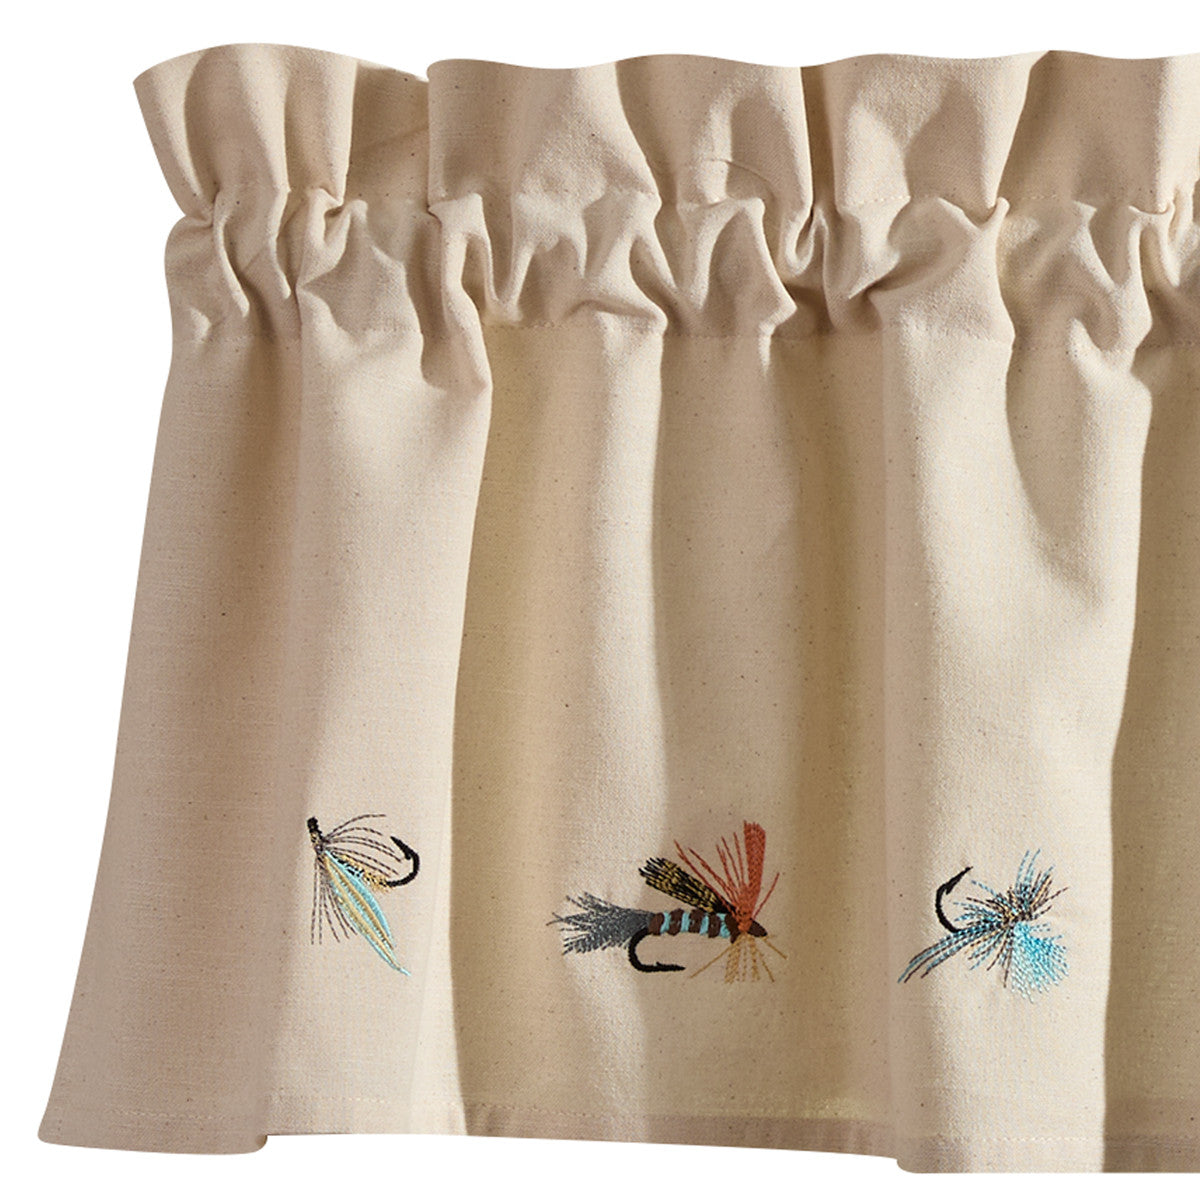 Fly Fishing Lined Embroidered Valance 14" L - Set of 2 Park designs